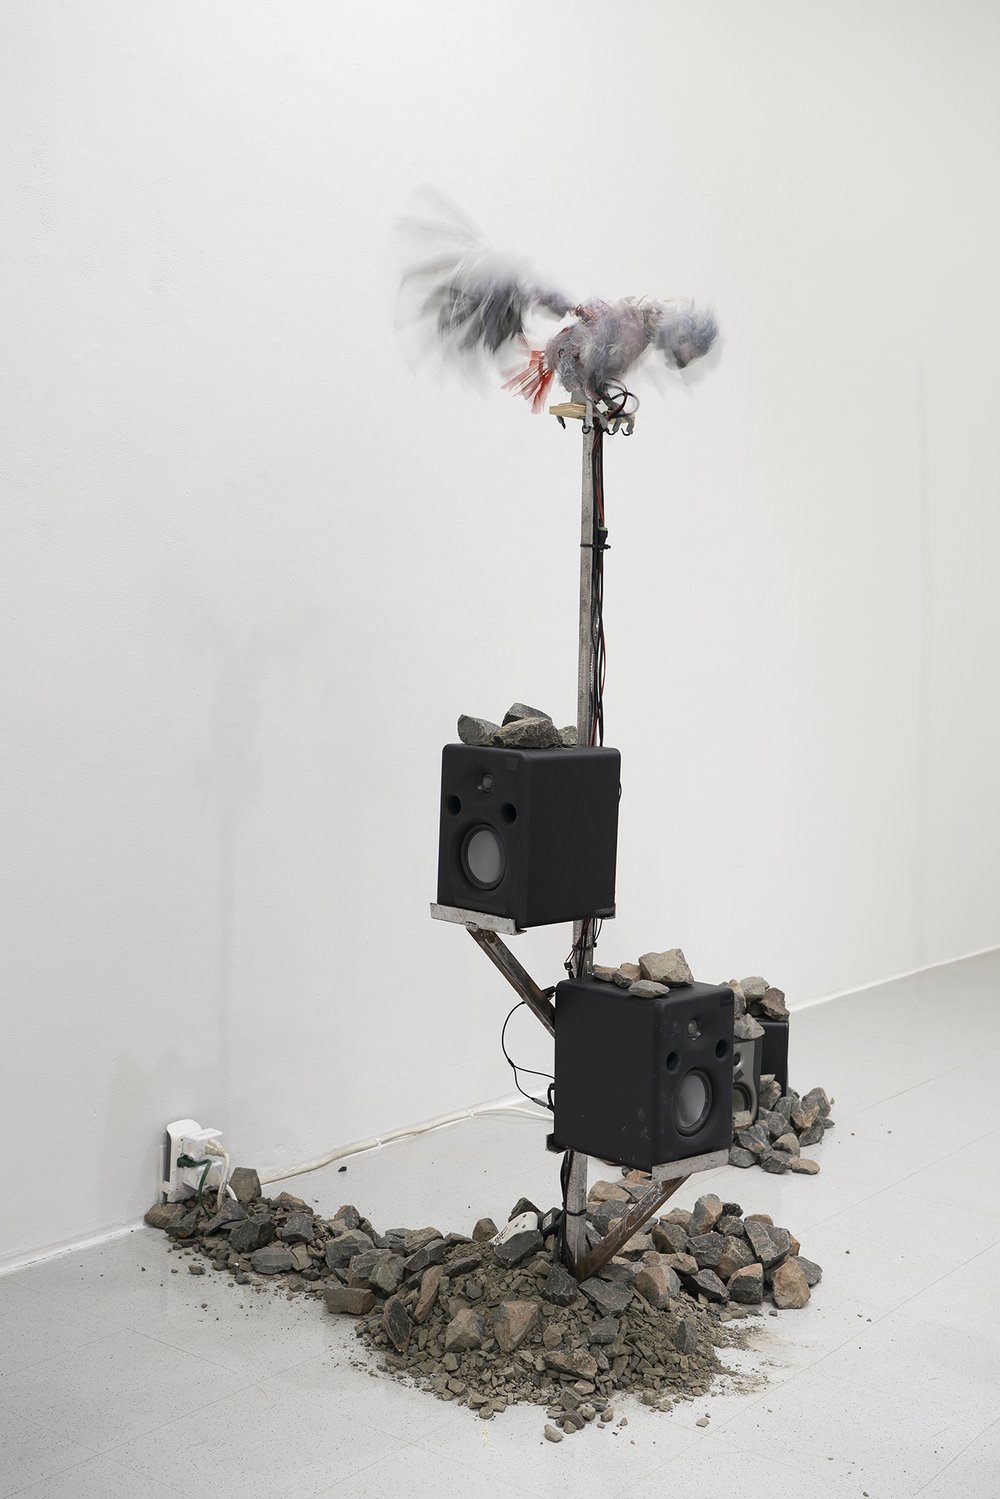  Anoushé Shojae-Chaghorvand,  The Operation Itself , 2021, Installation, Servo motors, pitch indicators, Arduino Unos, Pololu microcontrollers, feathers, silicone, Amazon Alexa, steel roller chain, plywood, thermoplastic, glass eyes, needles, hot glu